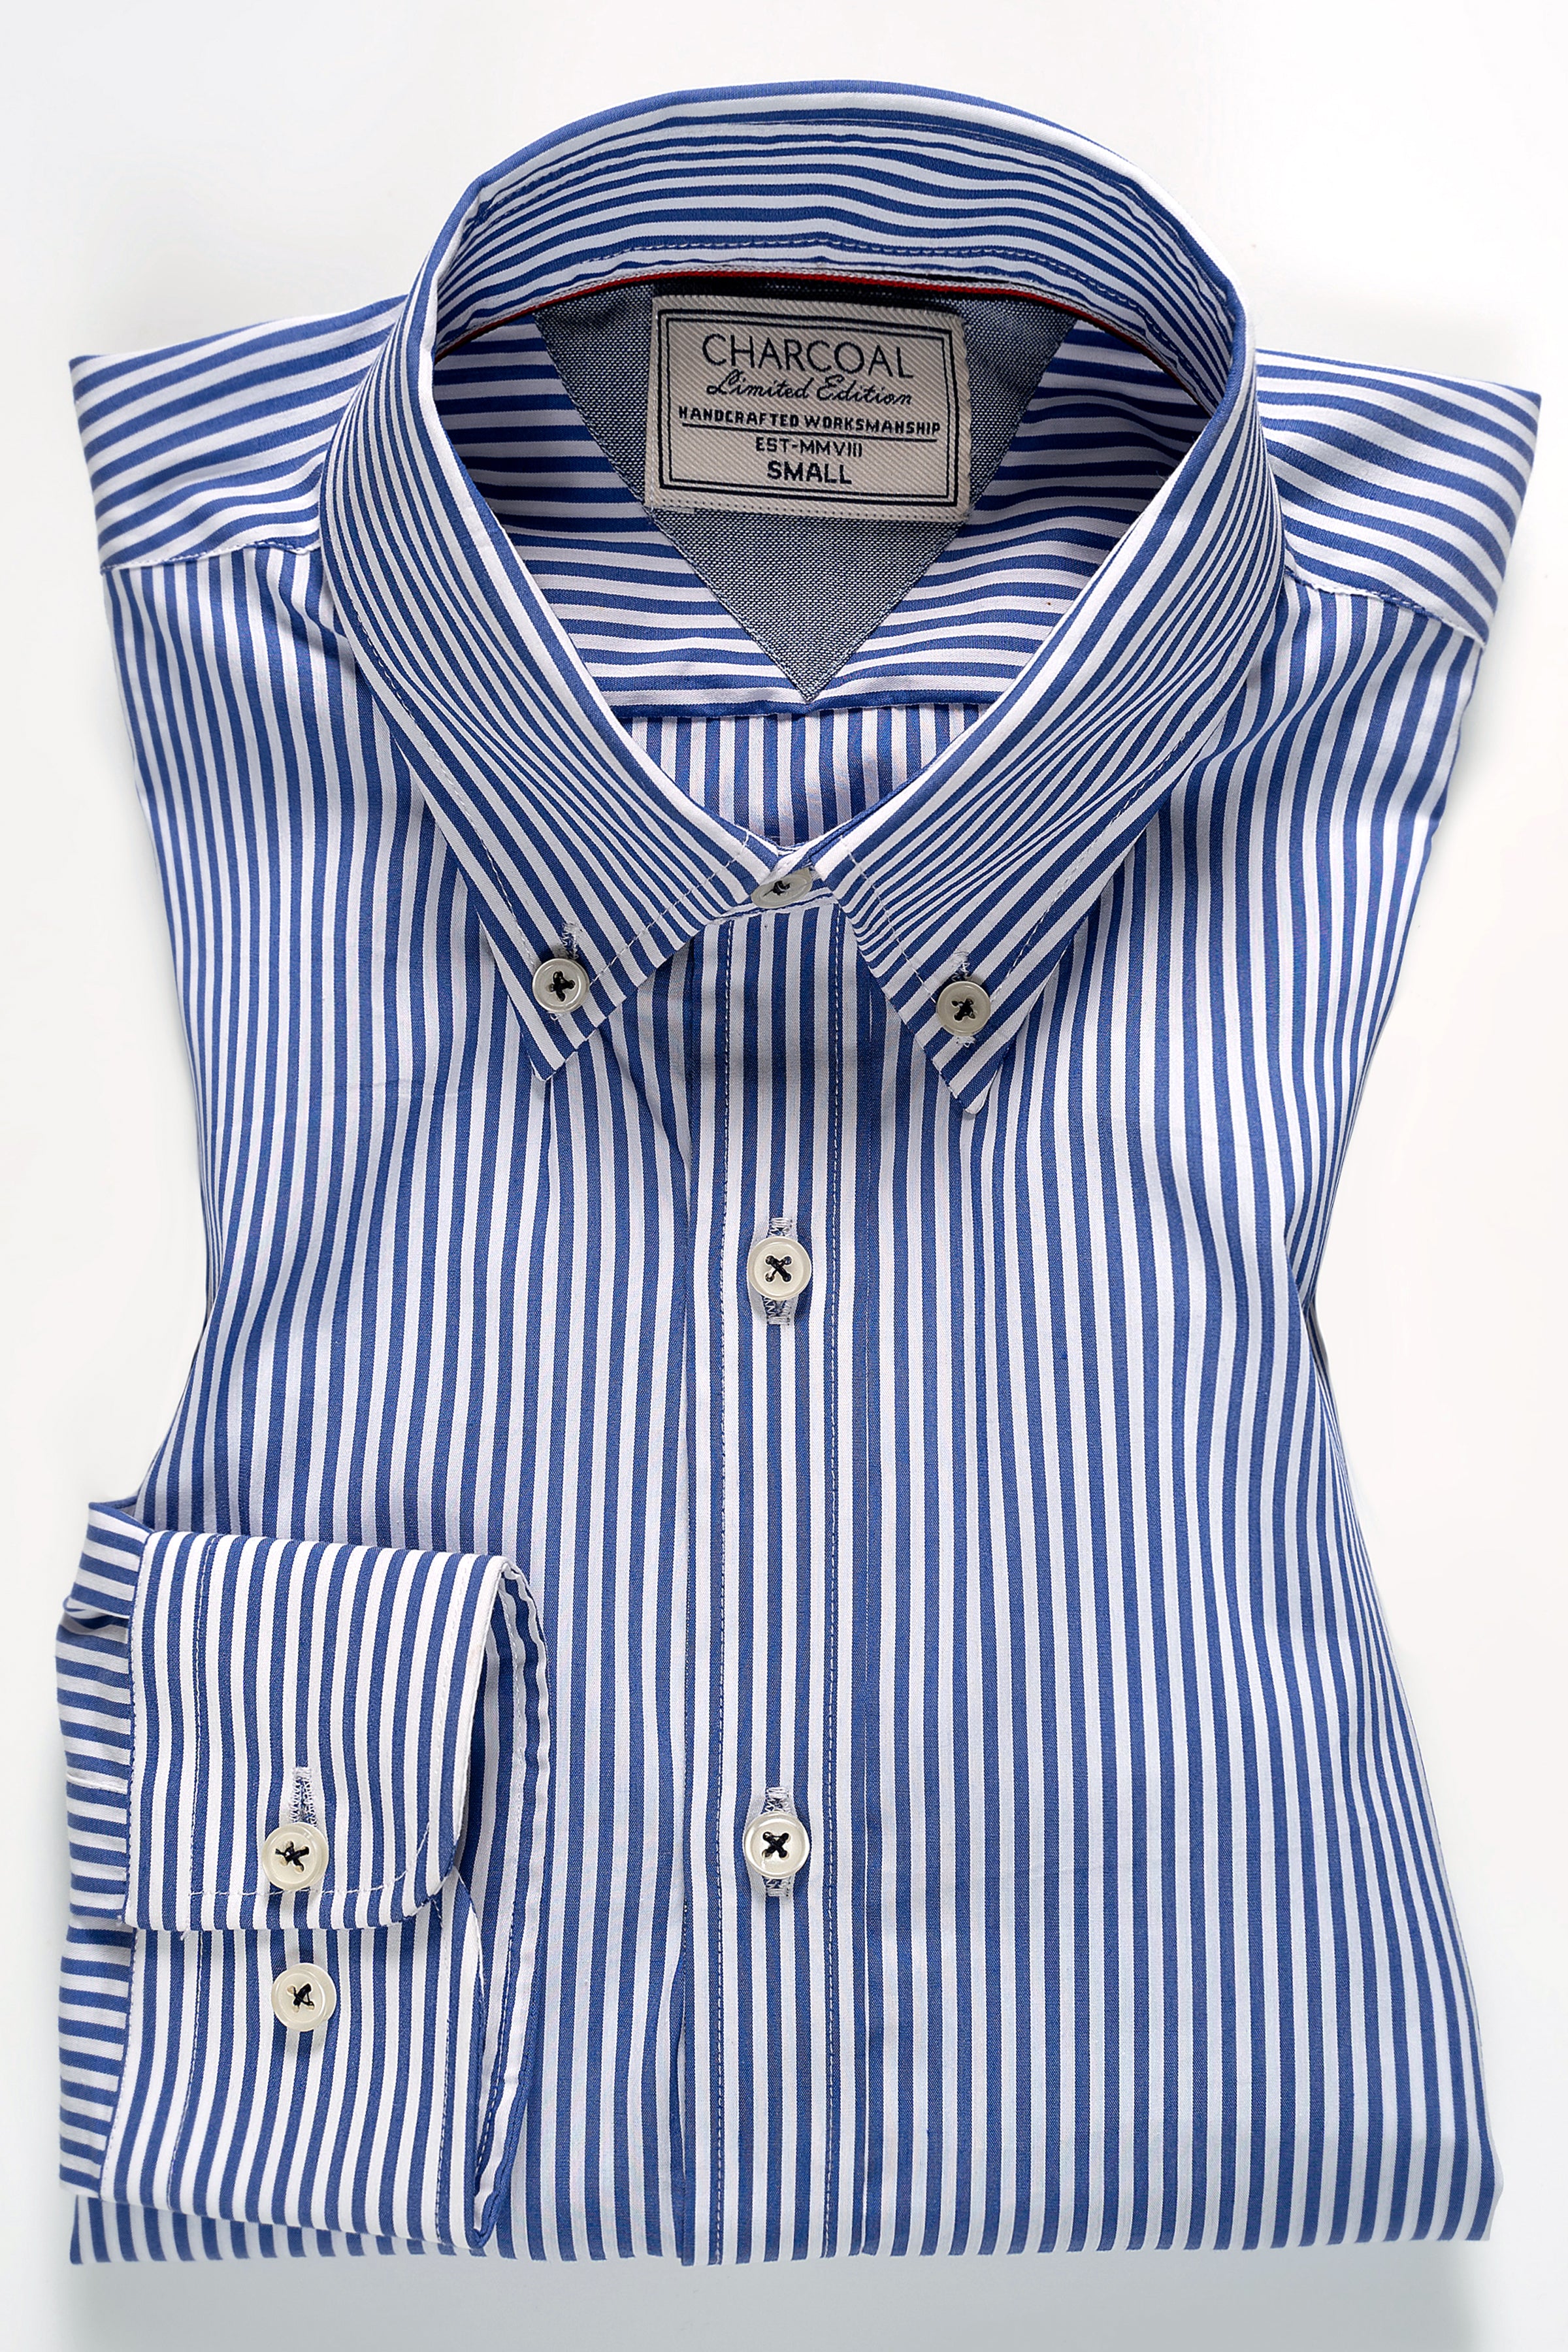 LIMITED EDITION SHIRT BLUE STRIPES - Charcoal Clothing